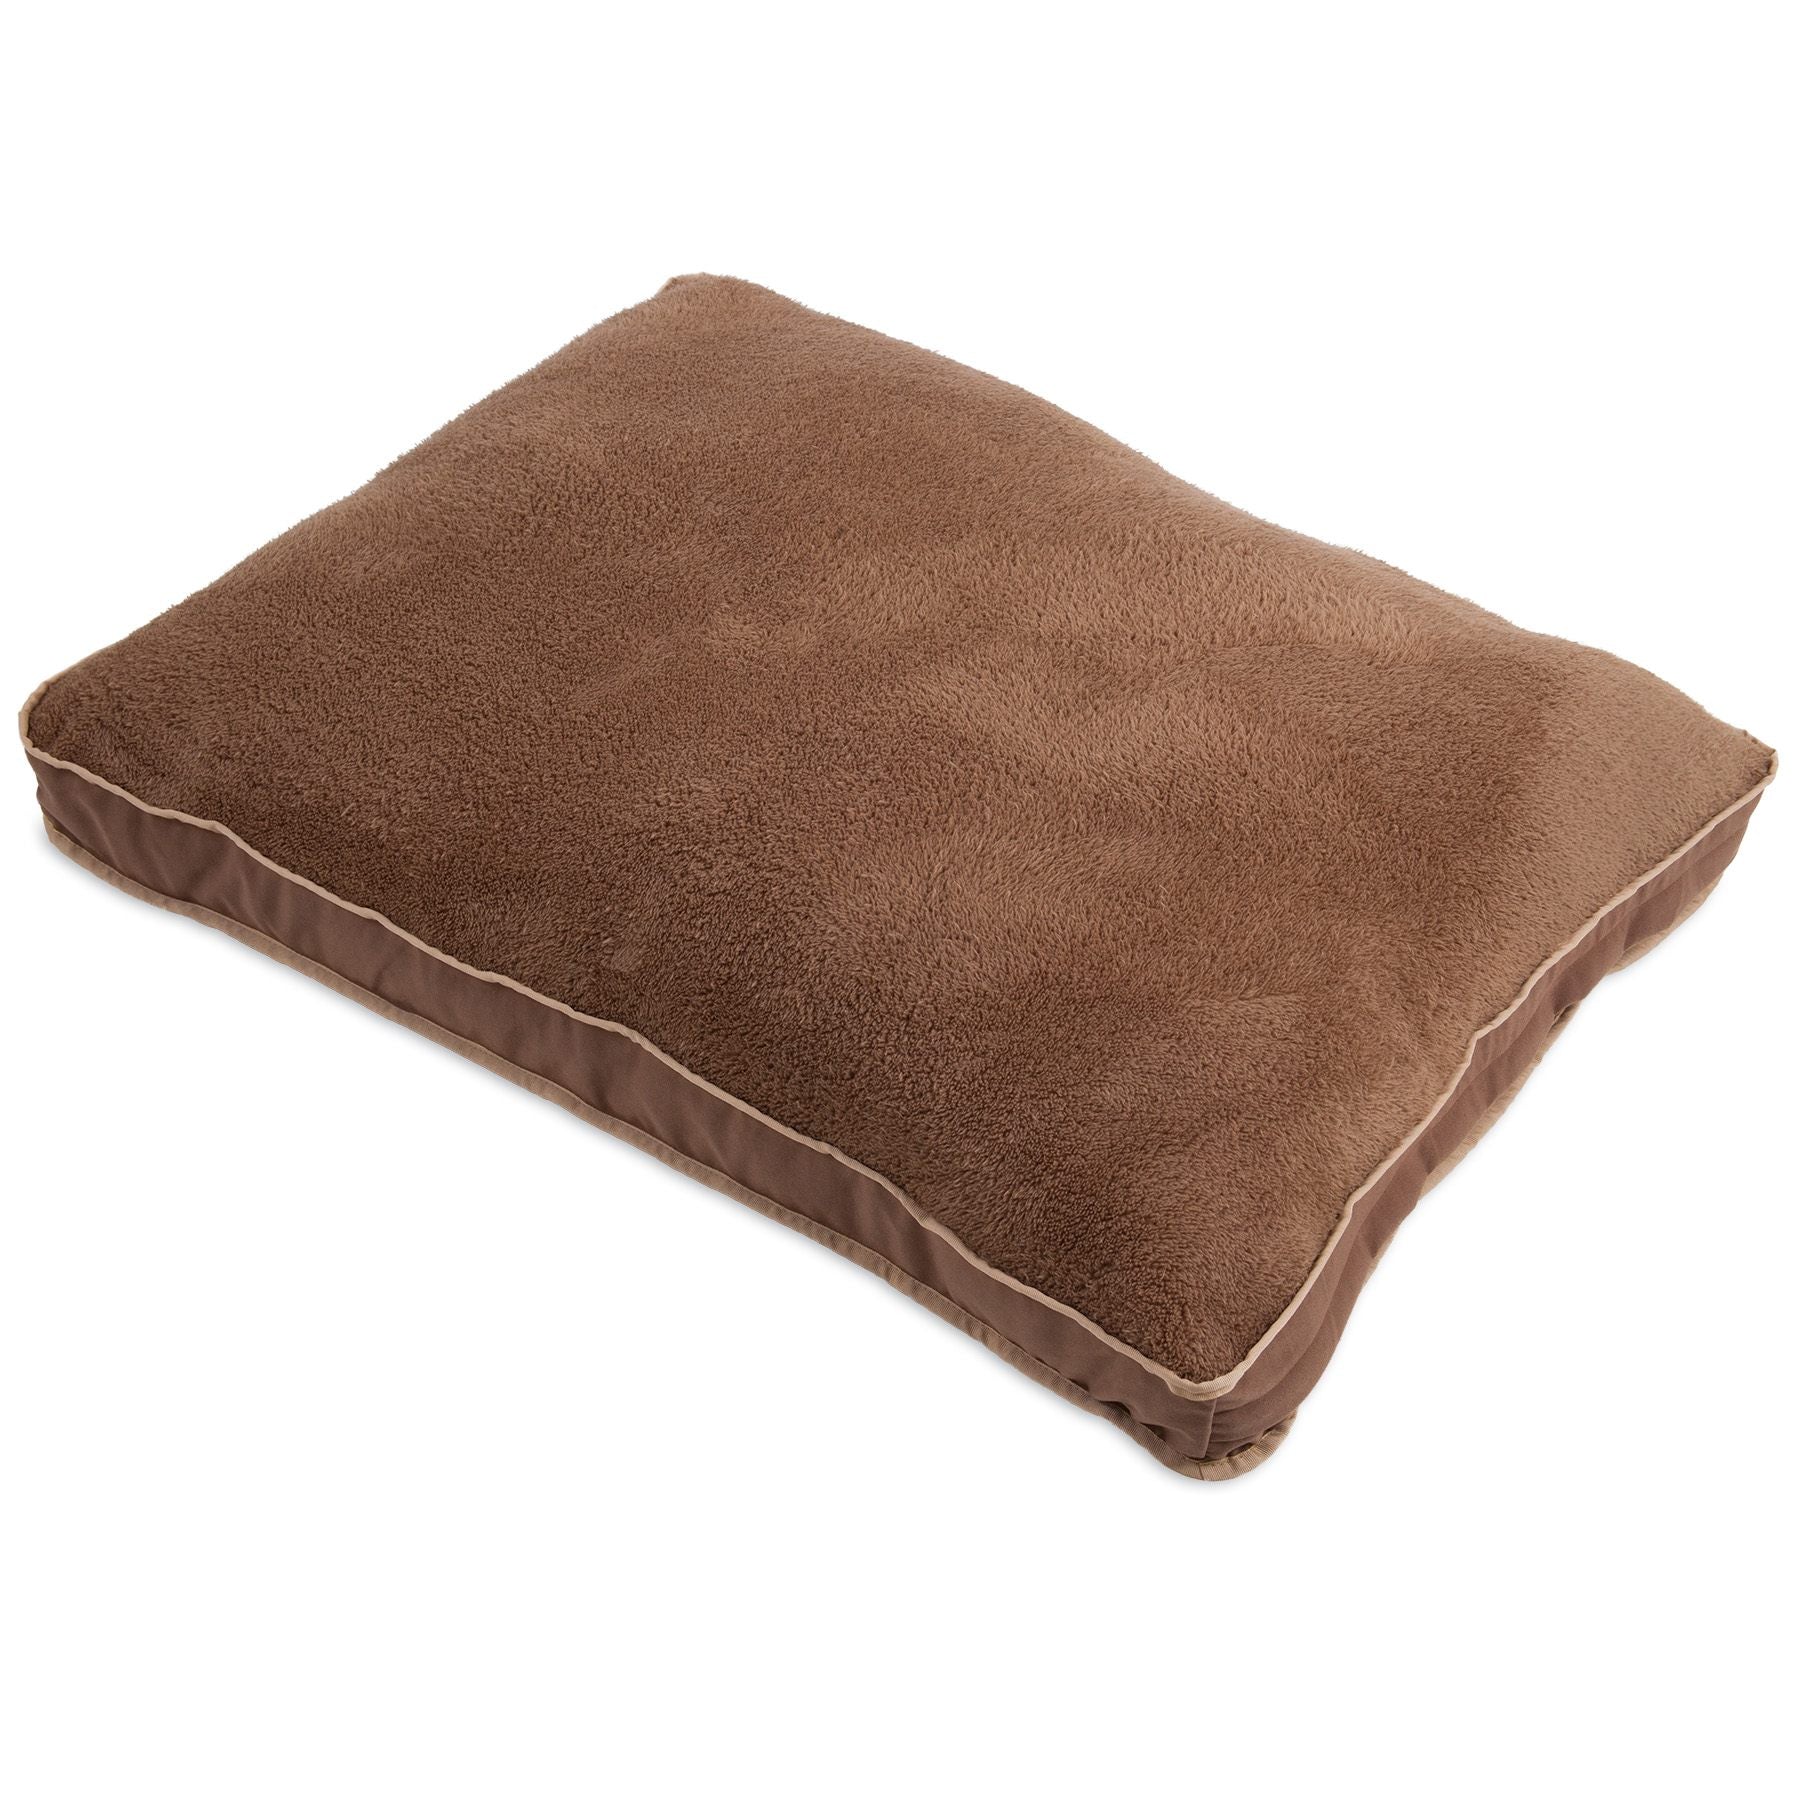 Ruffmaxx Canvas Gusseted Bed